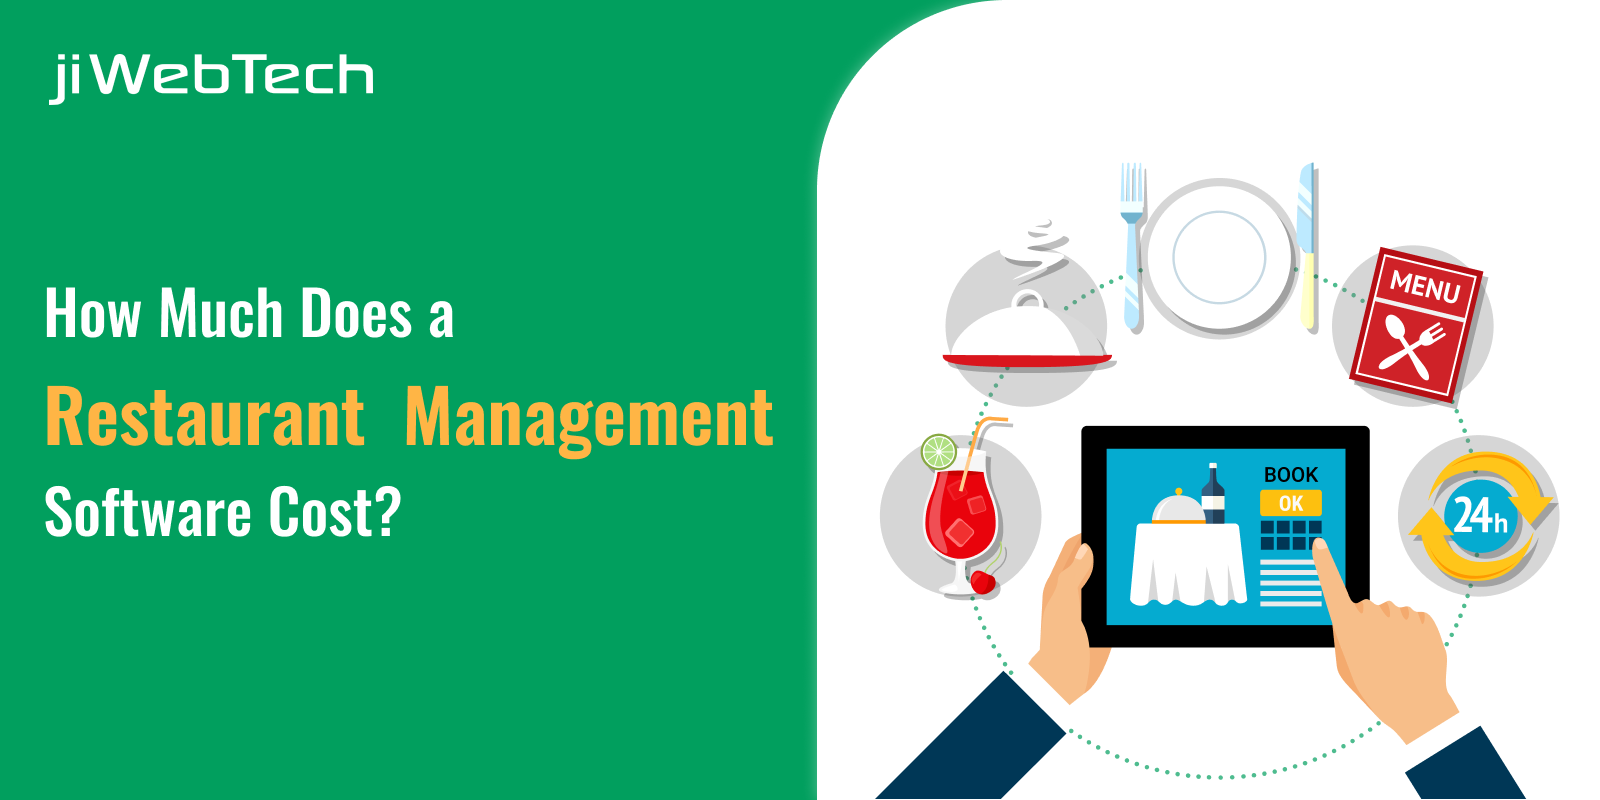 How Much Does a Restaurant Management Software Cost?